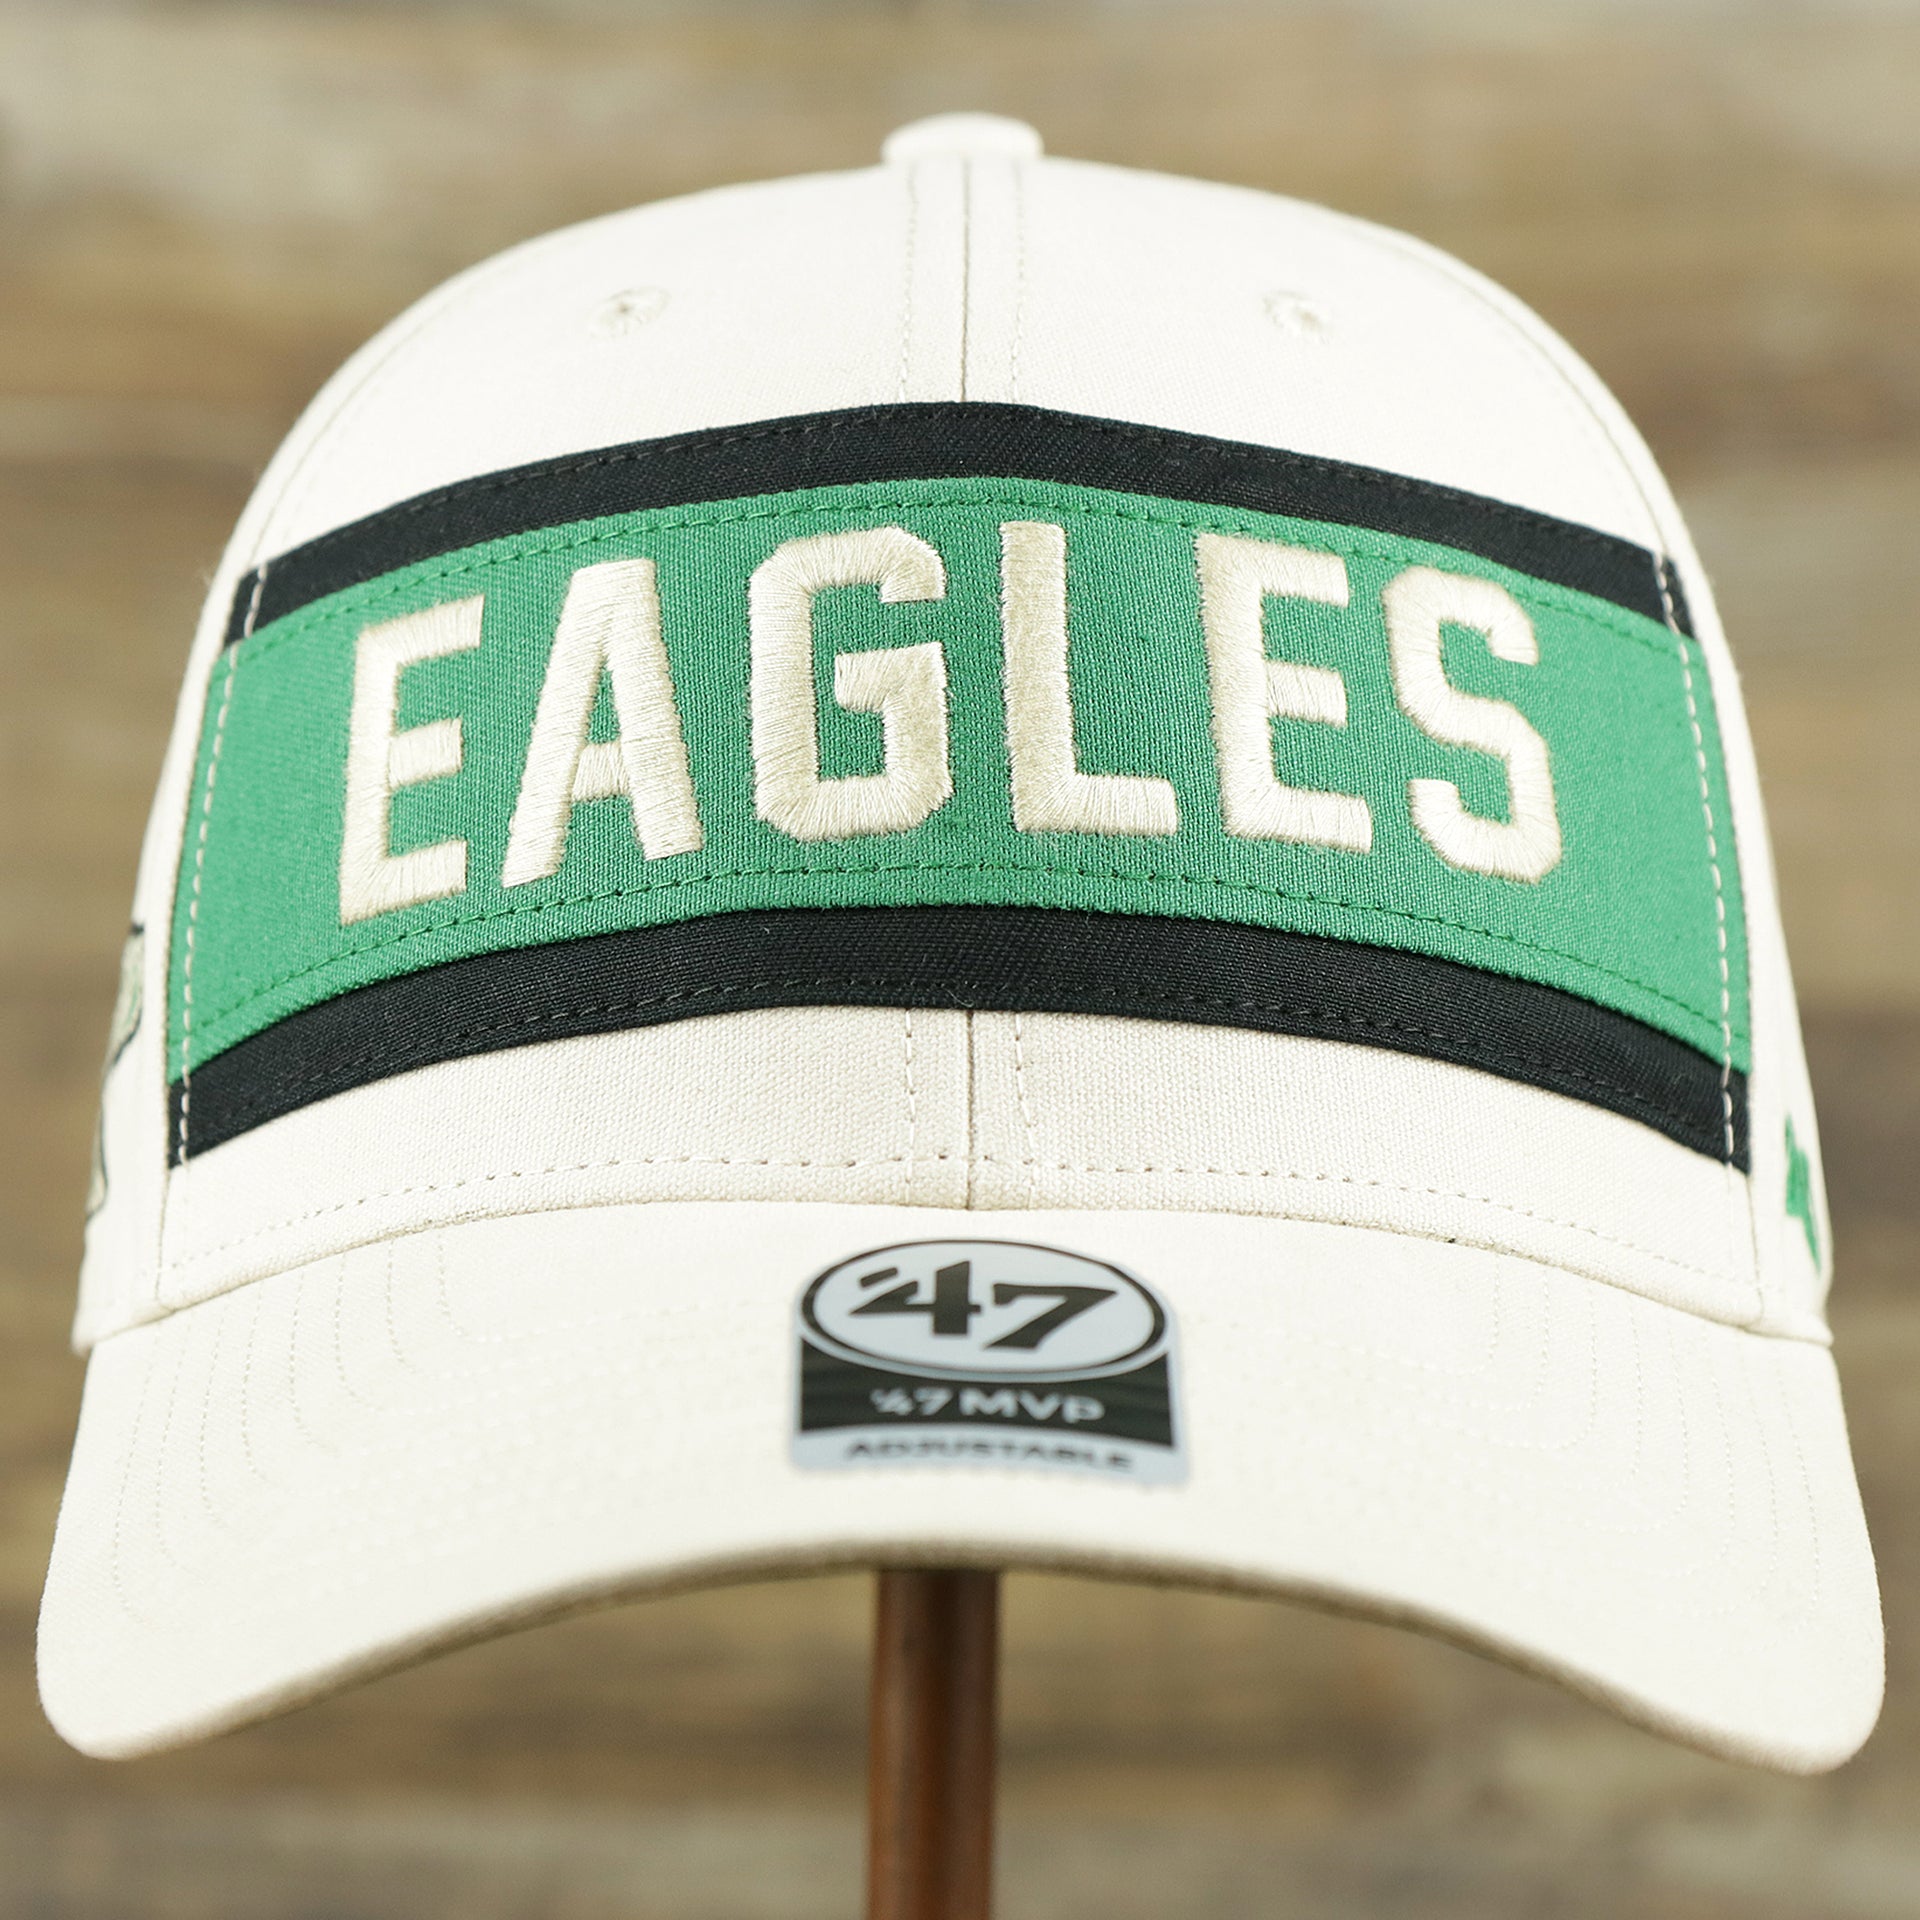 The front of the Throwback Philadelphia Eagles Striped Wordmark Legacy Eagles Side Patch Crossroad Dad Hat | Bone Dad Hat